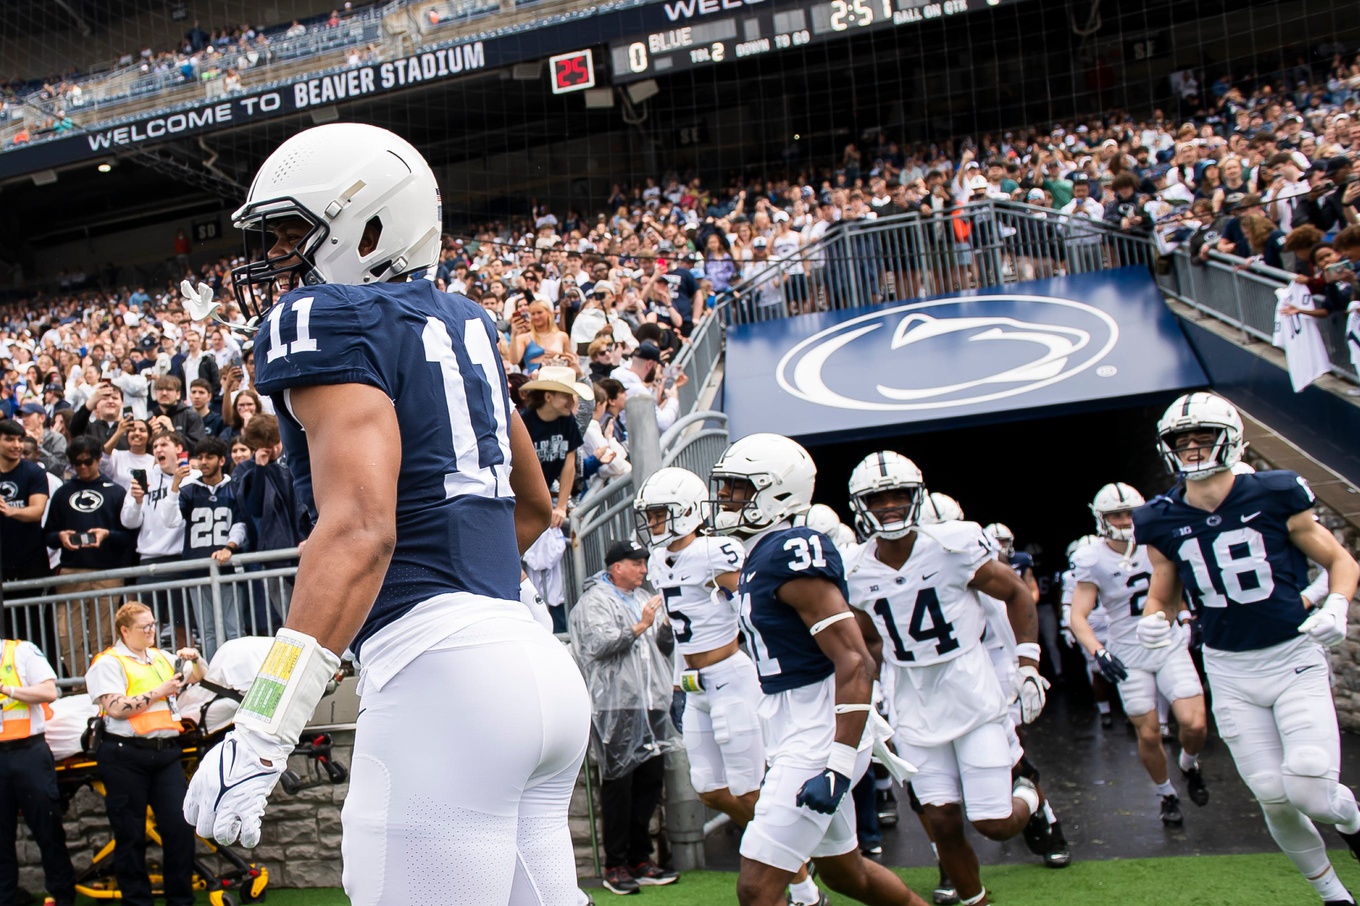 Penn State looks for its 43rd with against West Virginia to start the 2023 season. This is a series that dates back to 1904.